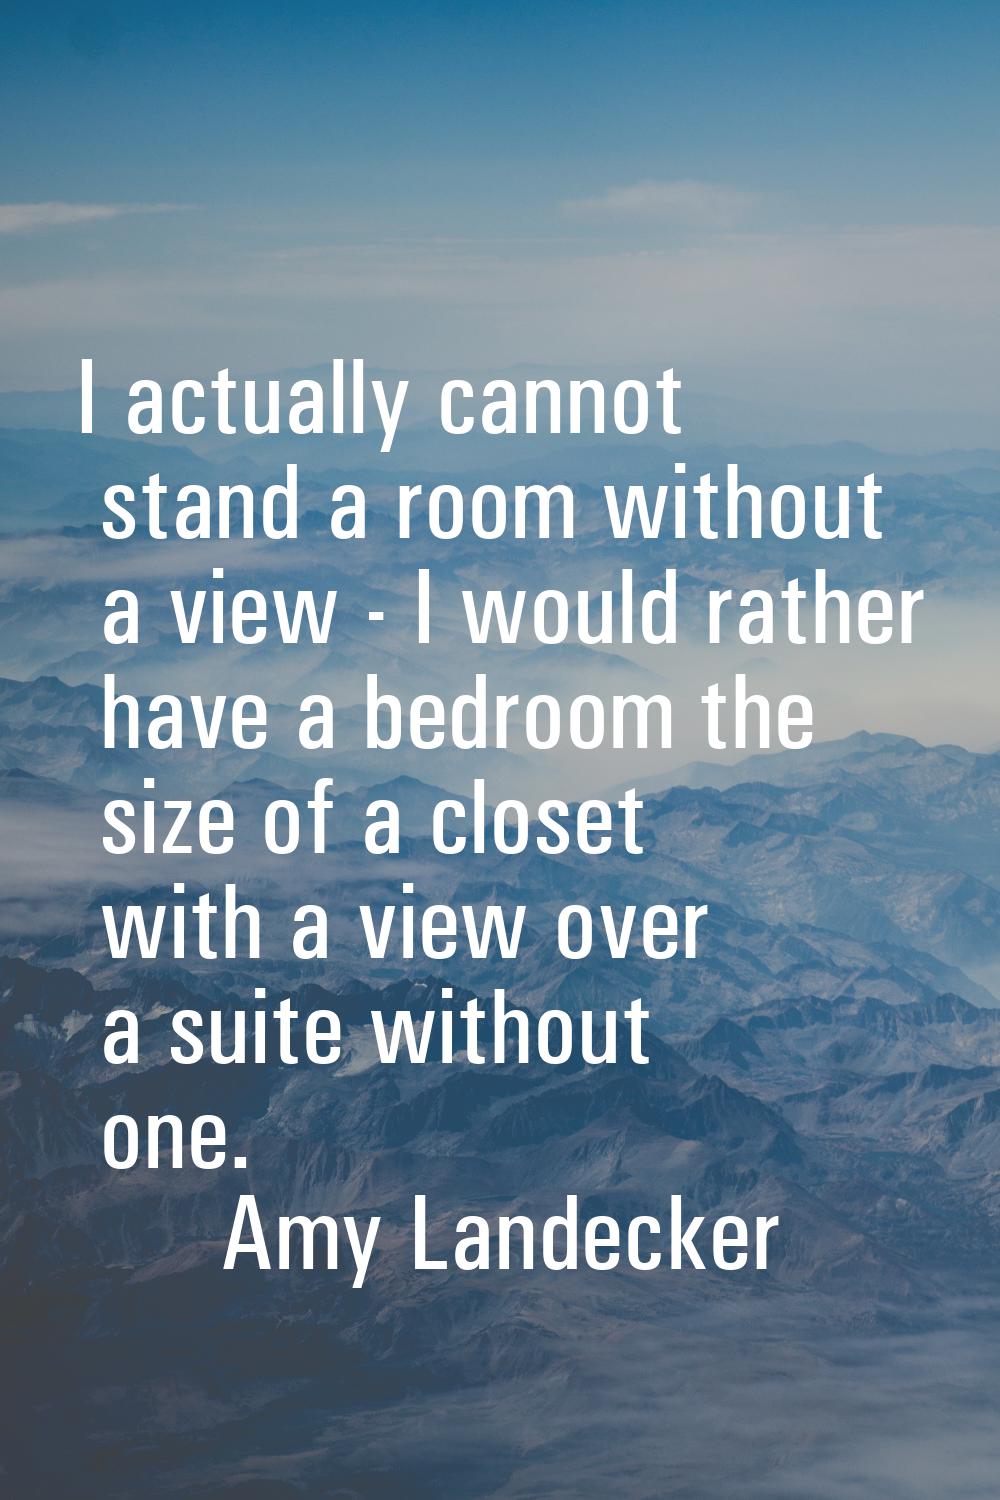 I actually cannot stand a room without a view - I would rather have a bedroom the size of a closet 